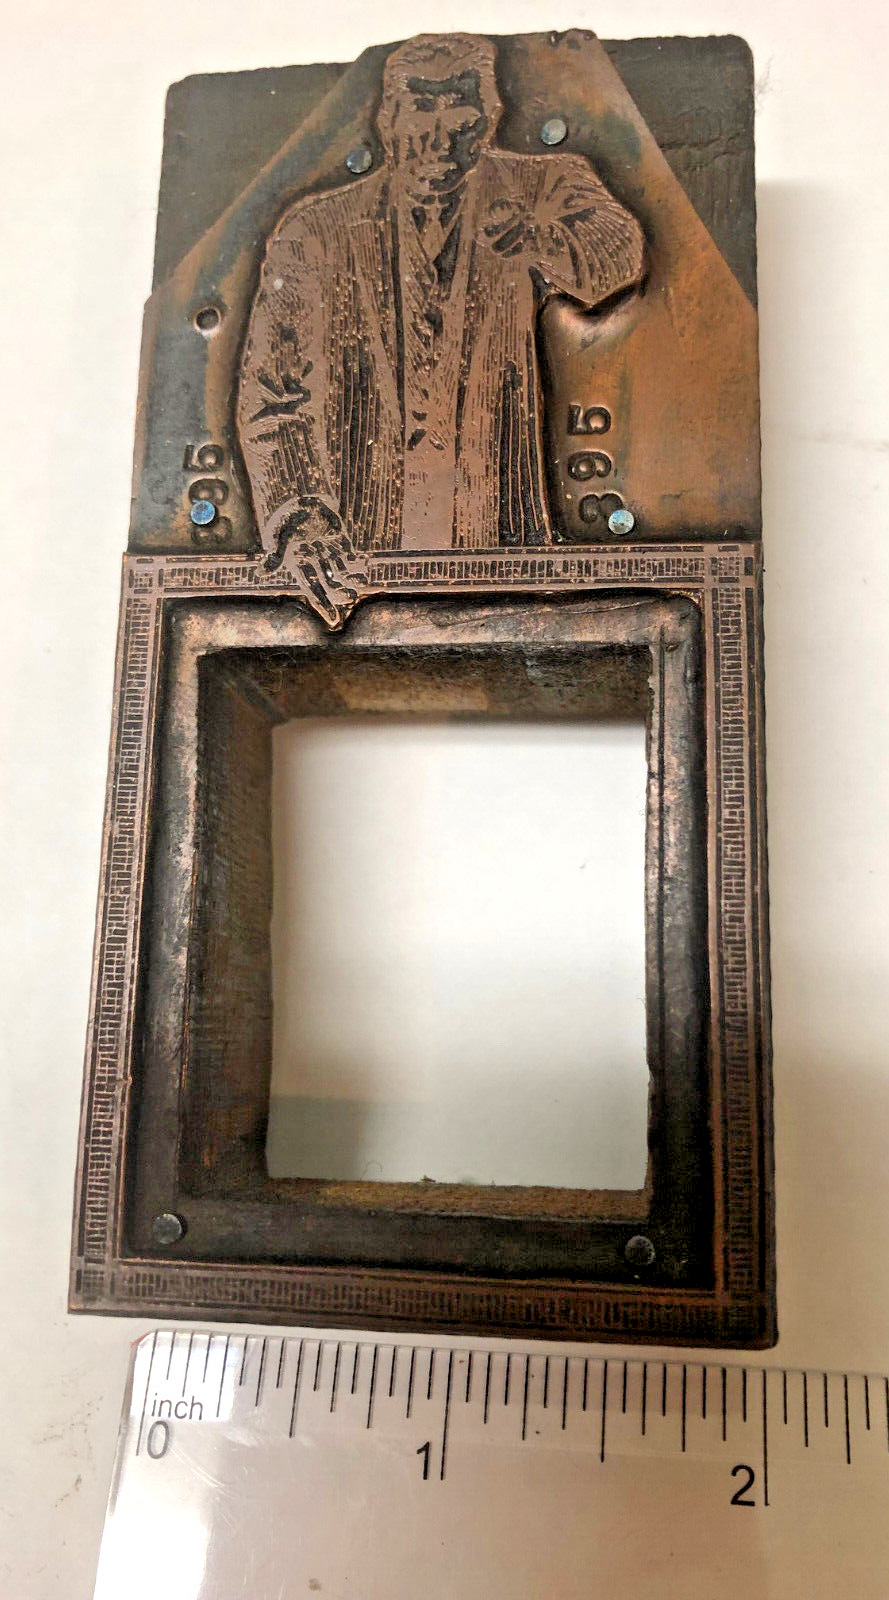 Vintage Letter Press Printing Block MAN WITH BLANK PICTURE FRAME SHAPE